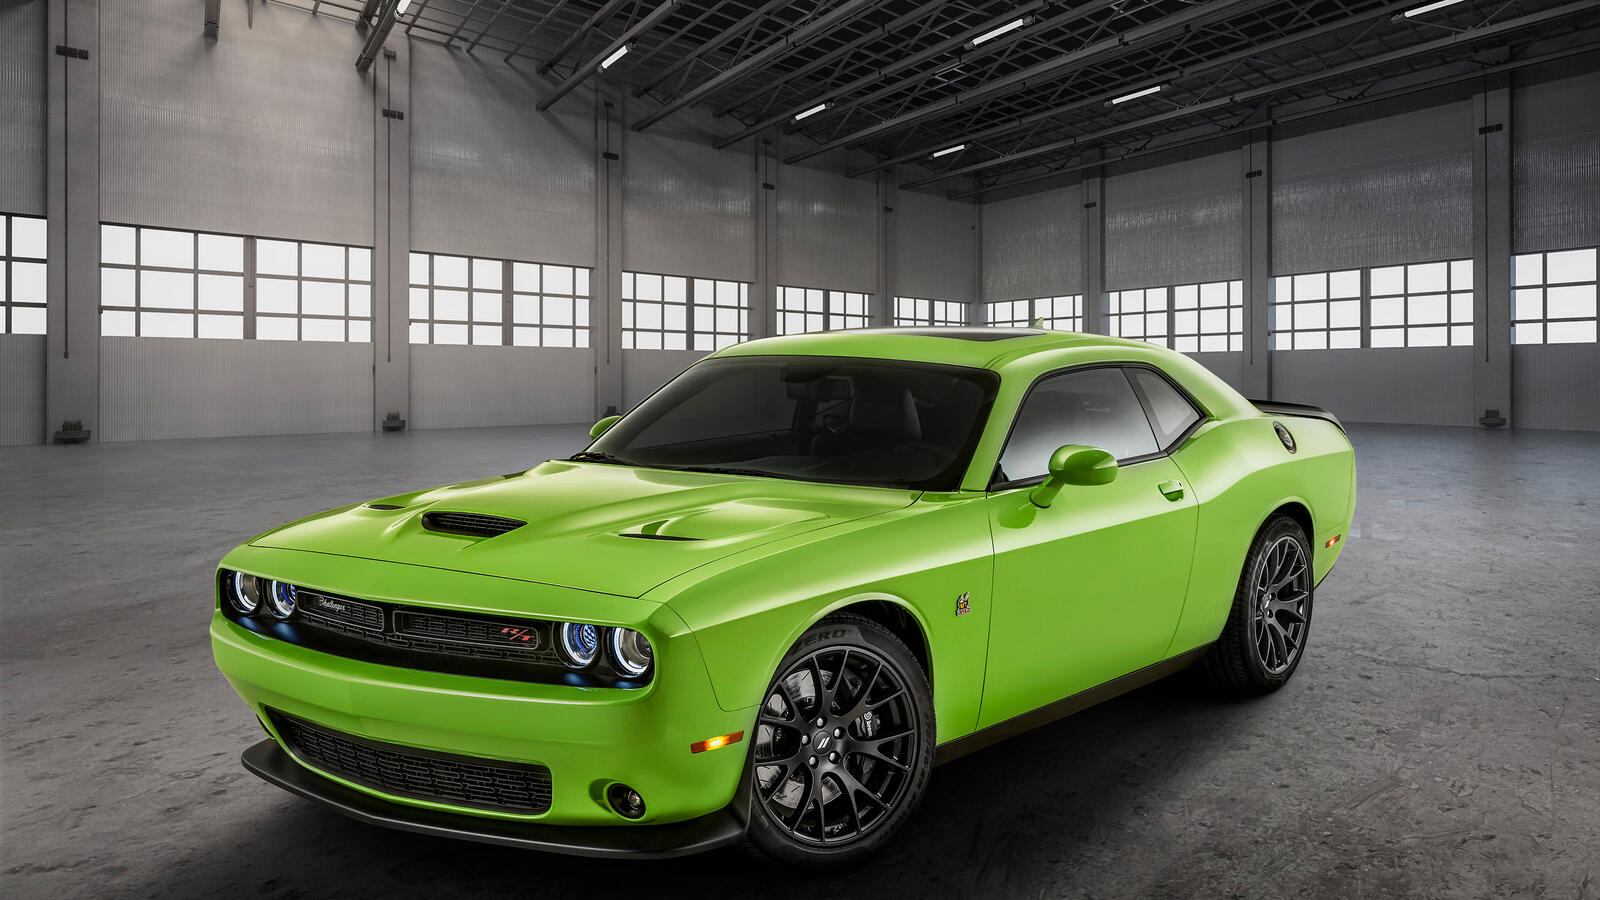 Free photo The Dodge Charger is a lettuce-colored